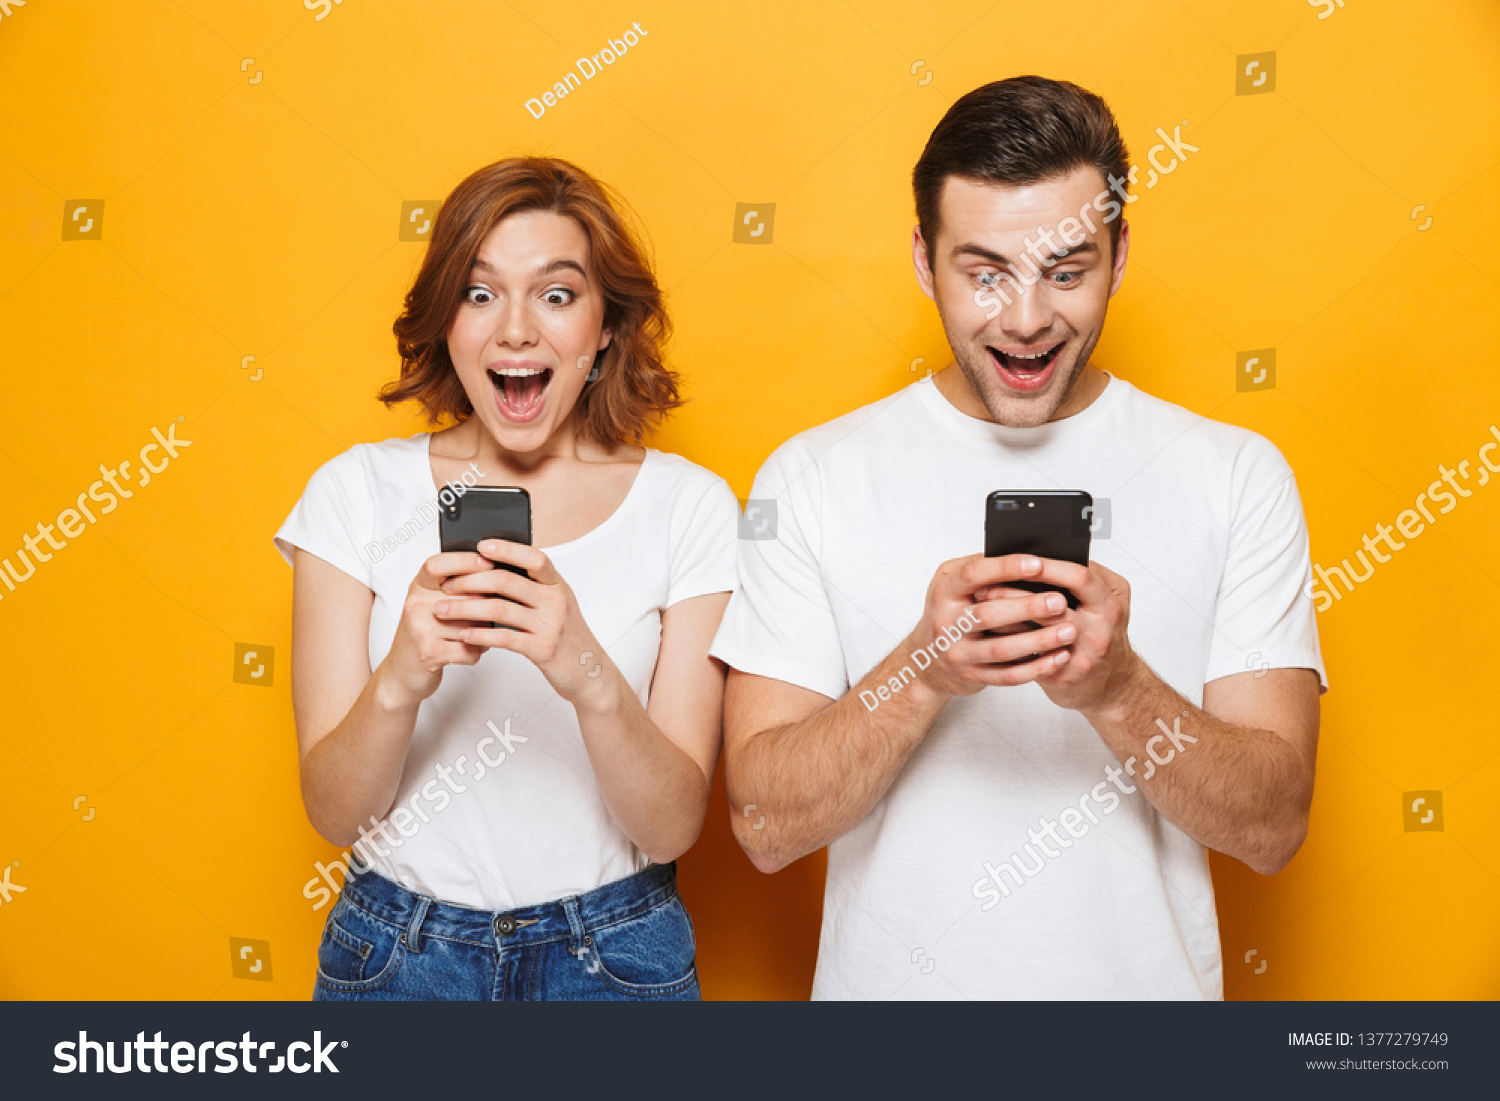 Portrait of a cheerful young couple standing isolated over yellow background, using mobile phones #1377279749